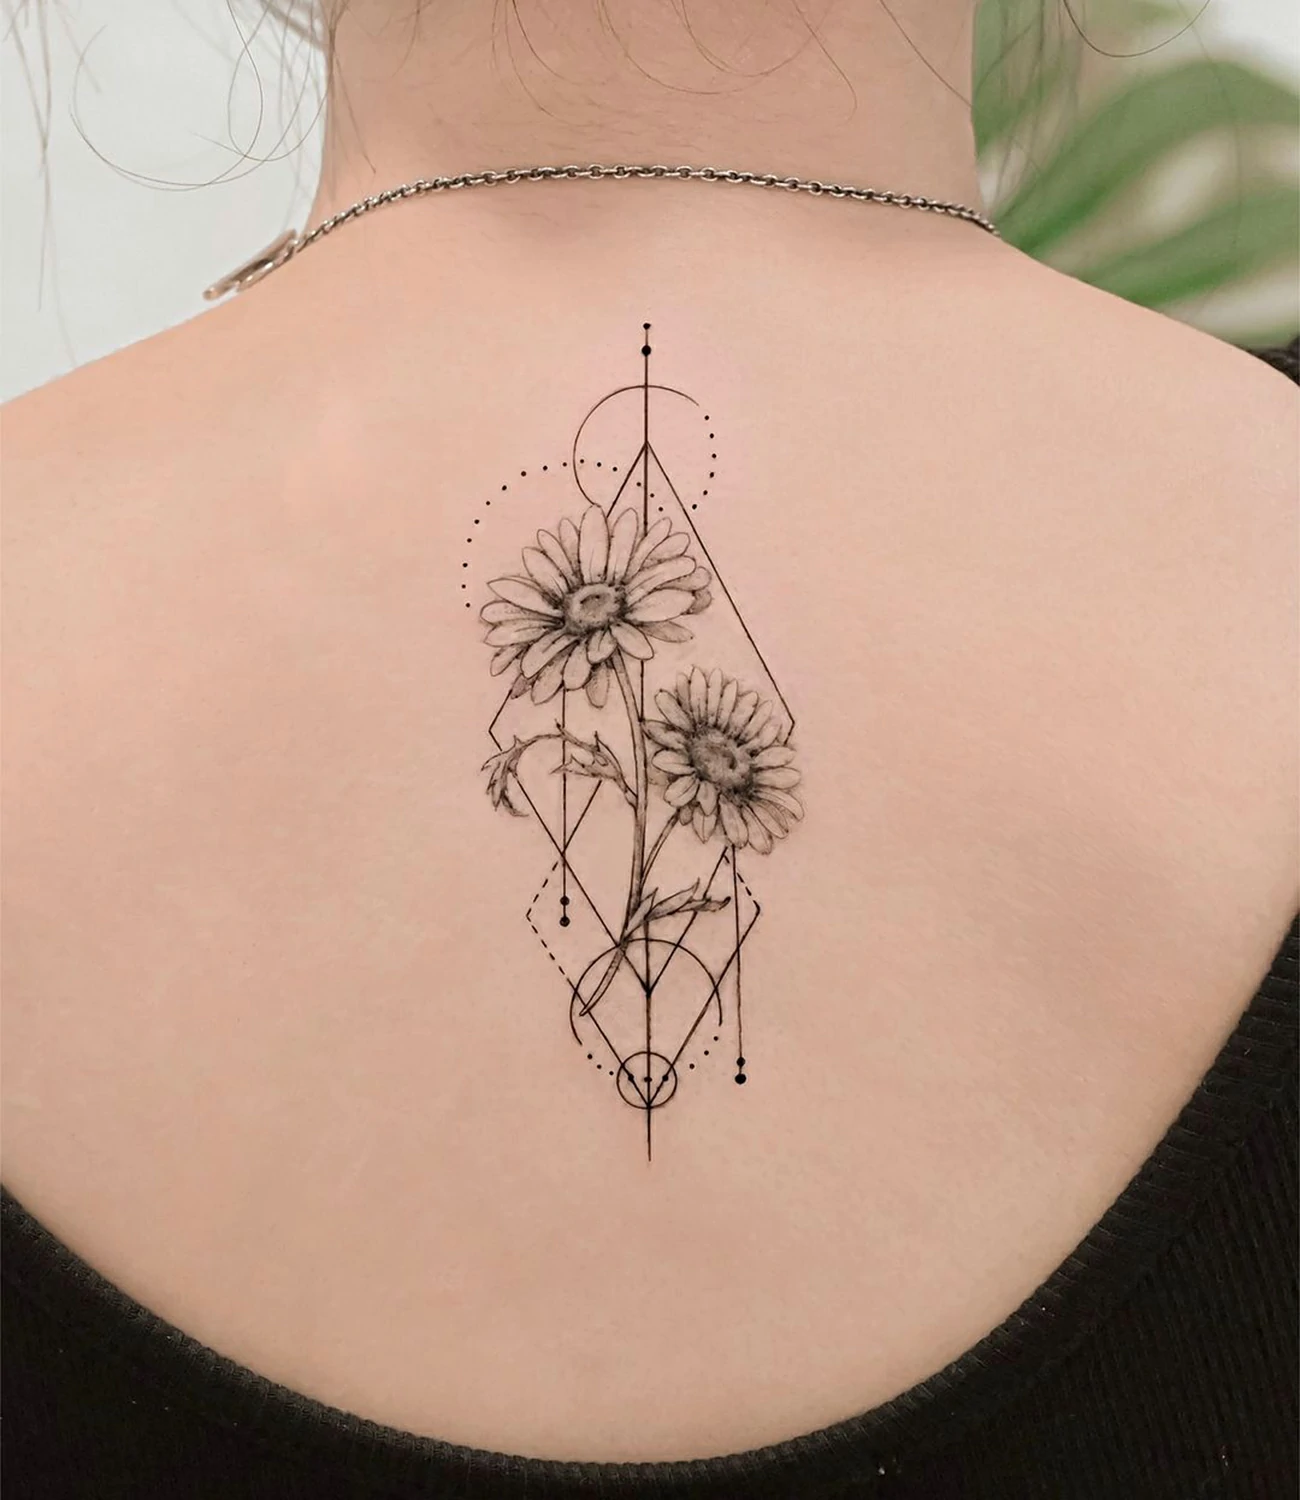 Geometric Floral Tattoo: Geometric floral tattoos merge the elegance of flowers with the precision of geometric shapes, symbolizing beauty and the harmony of nature.